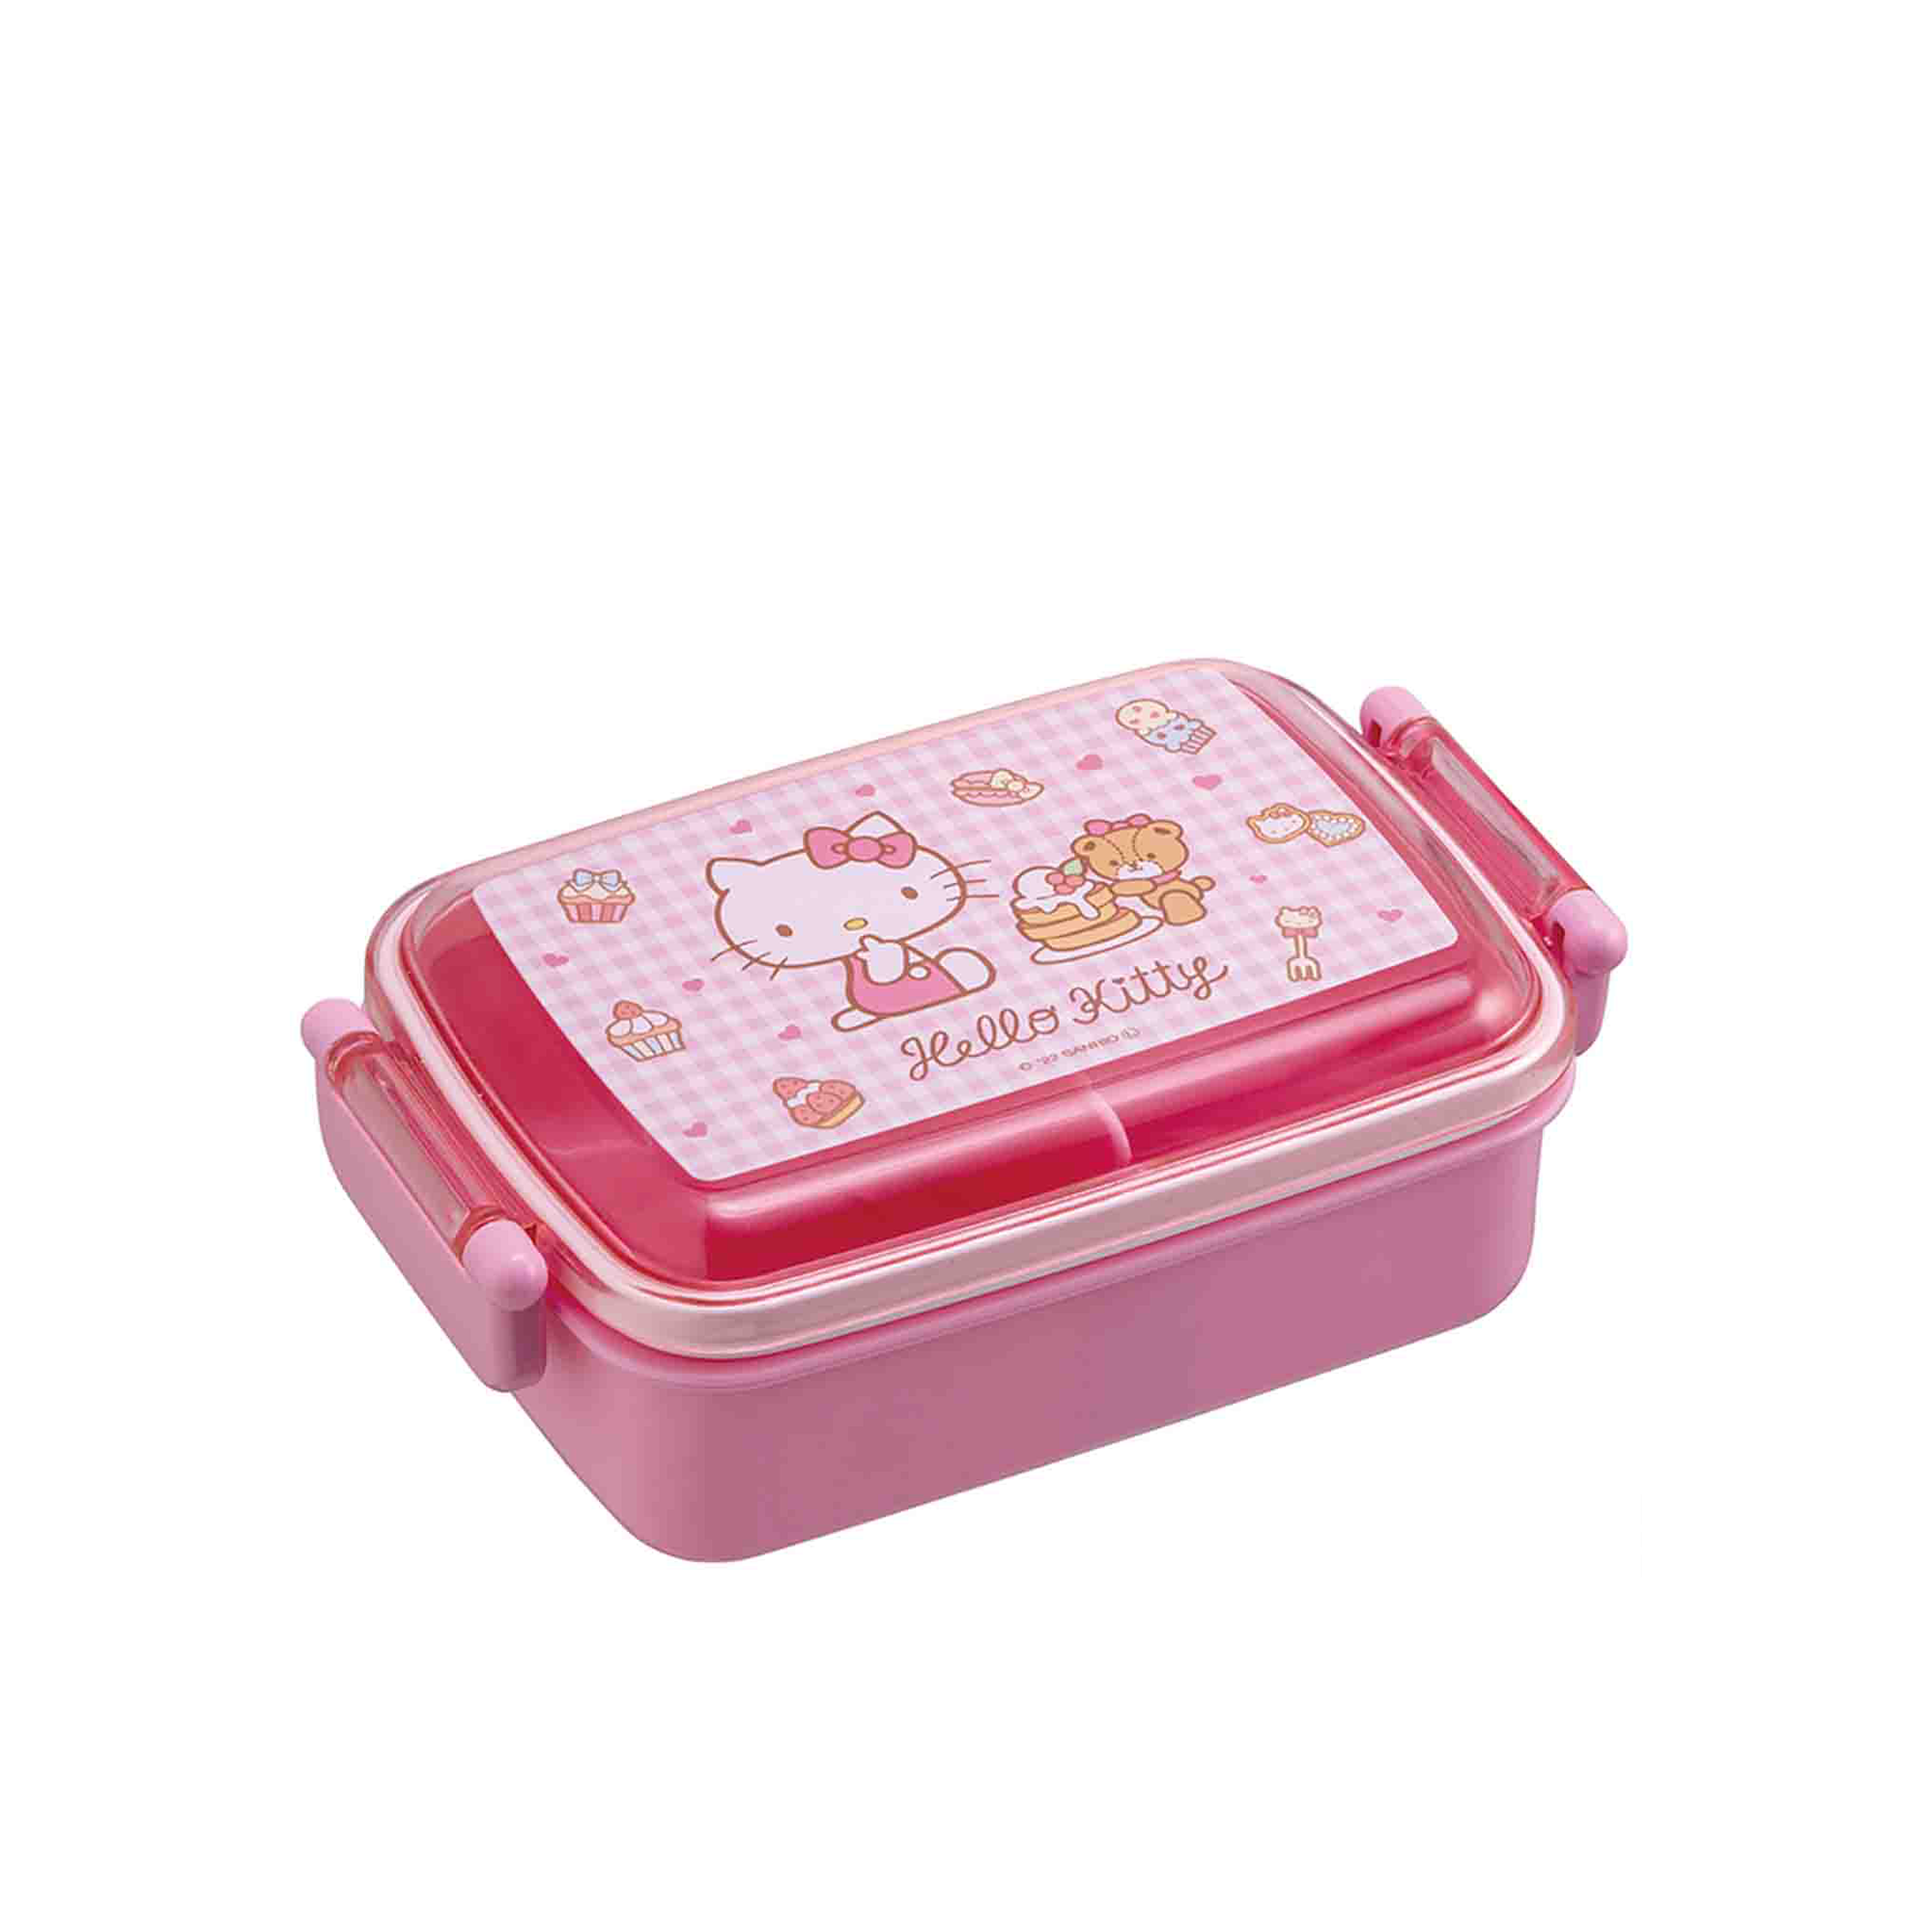 Hello Kitty Sweets Bento Box Home Goods CLEVER IDIOTS   